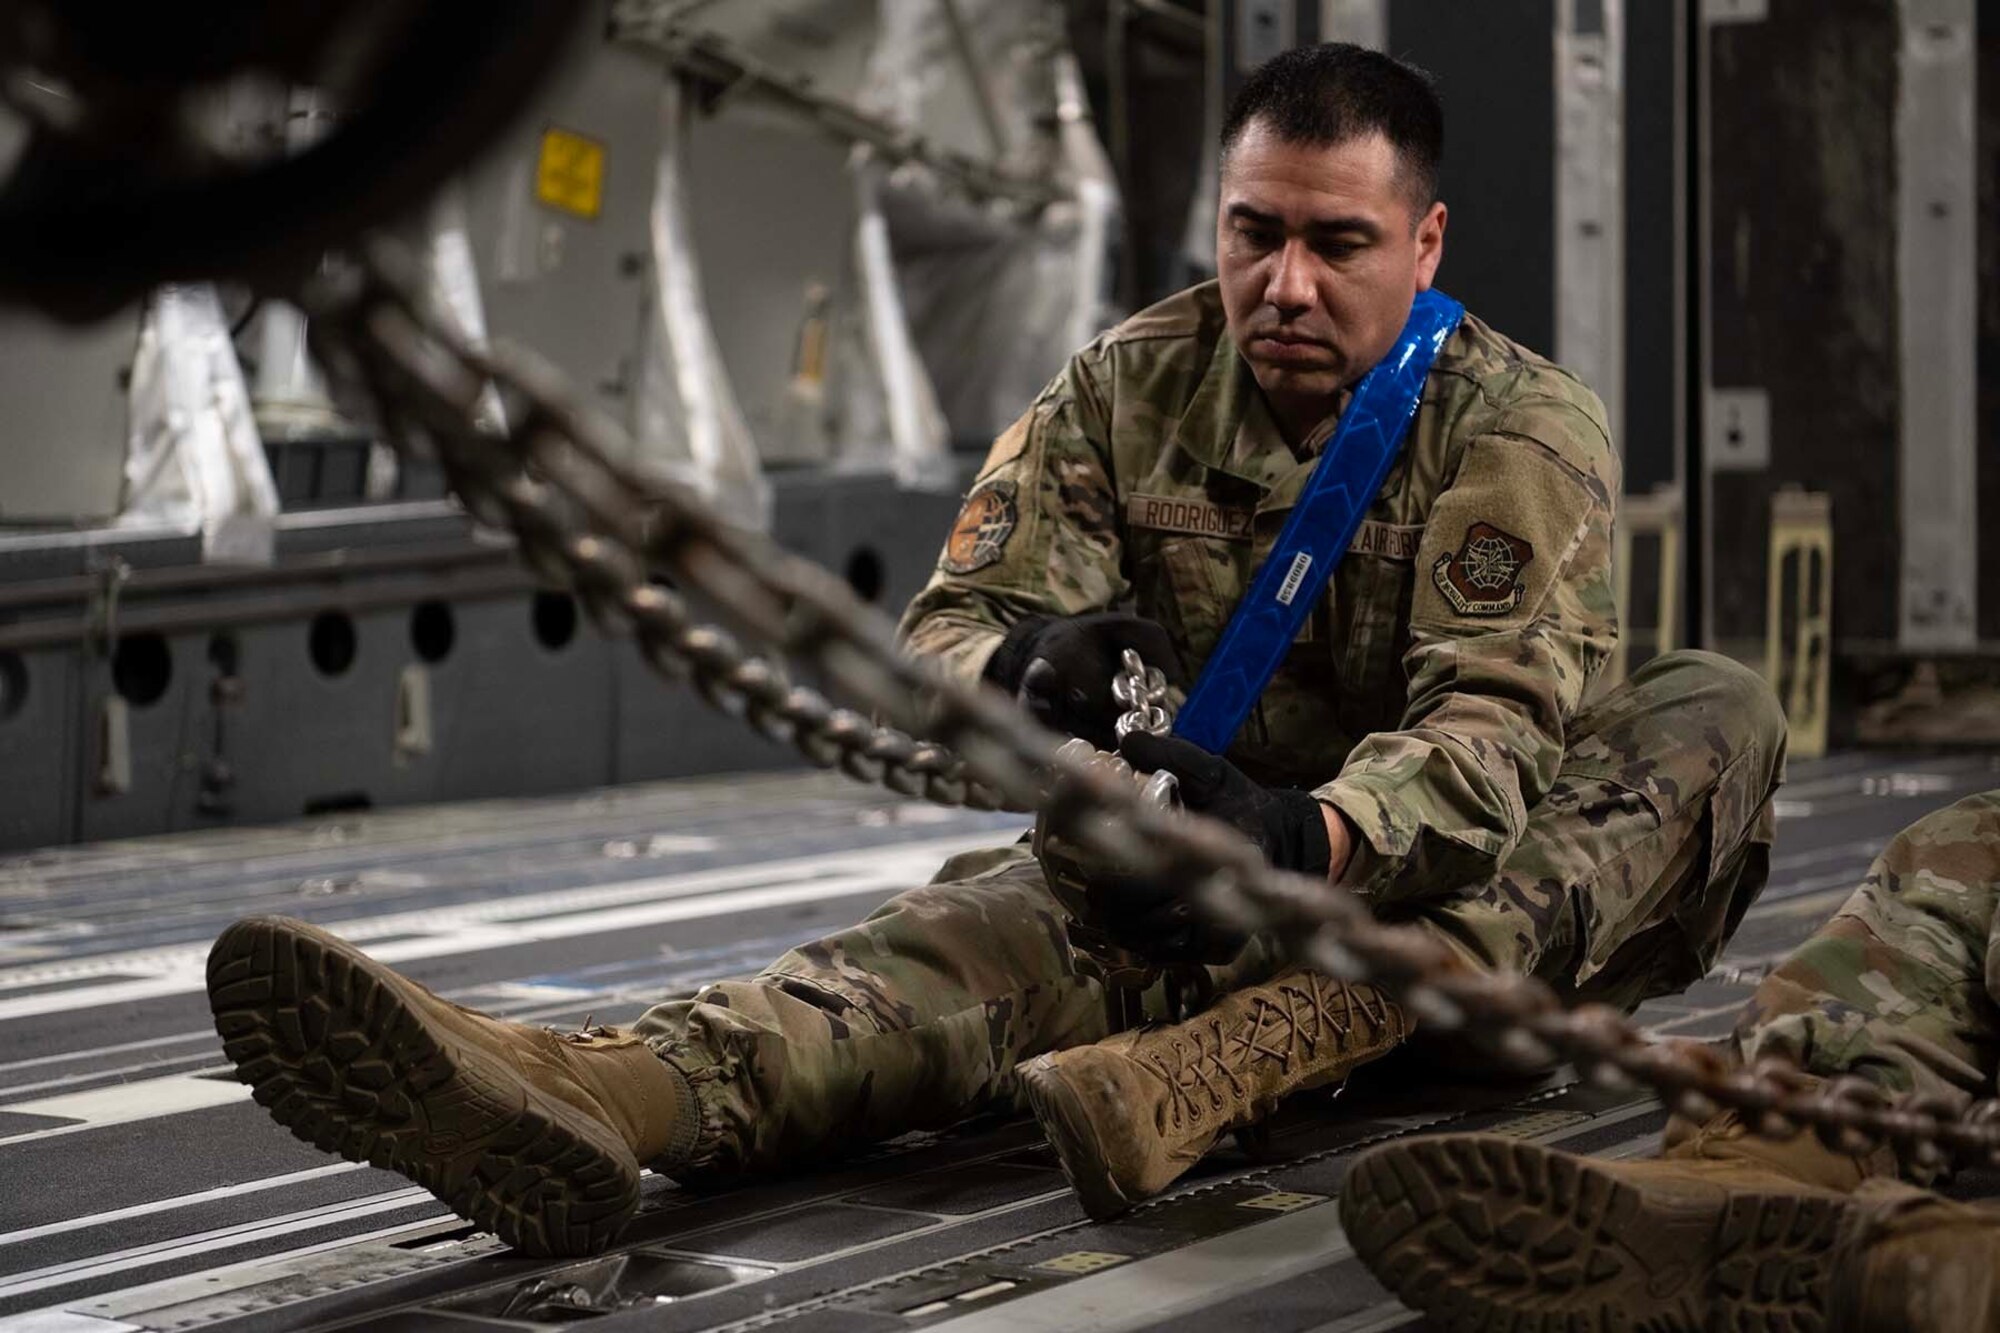 Airman sits on plane floor and locks a chain.